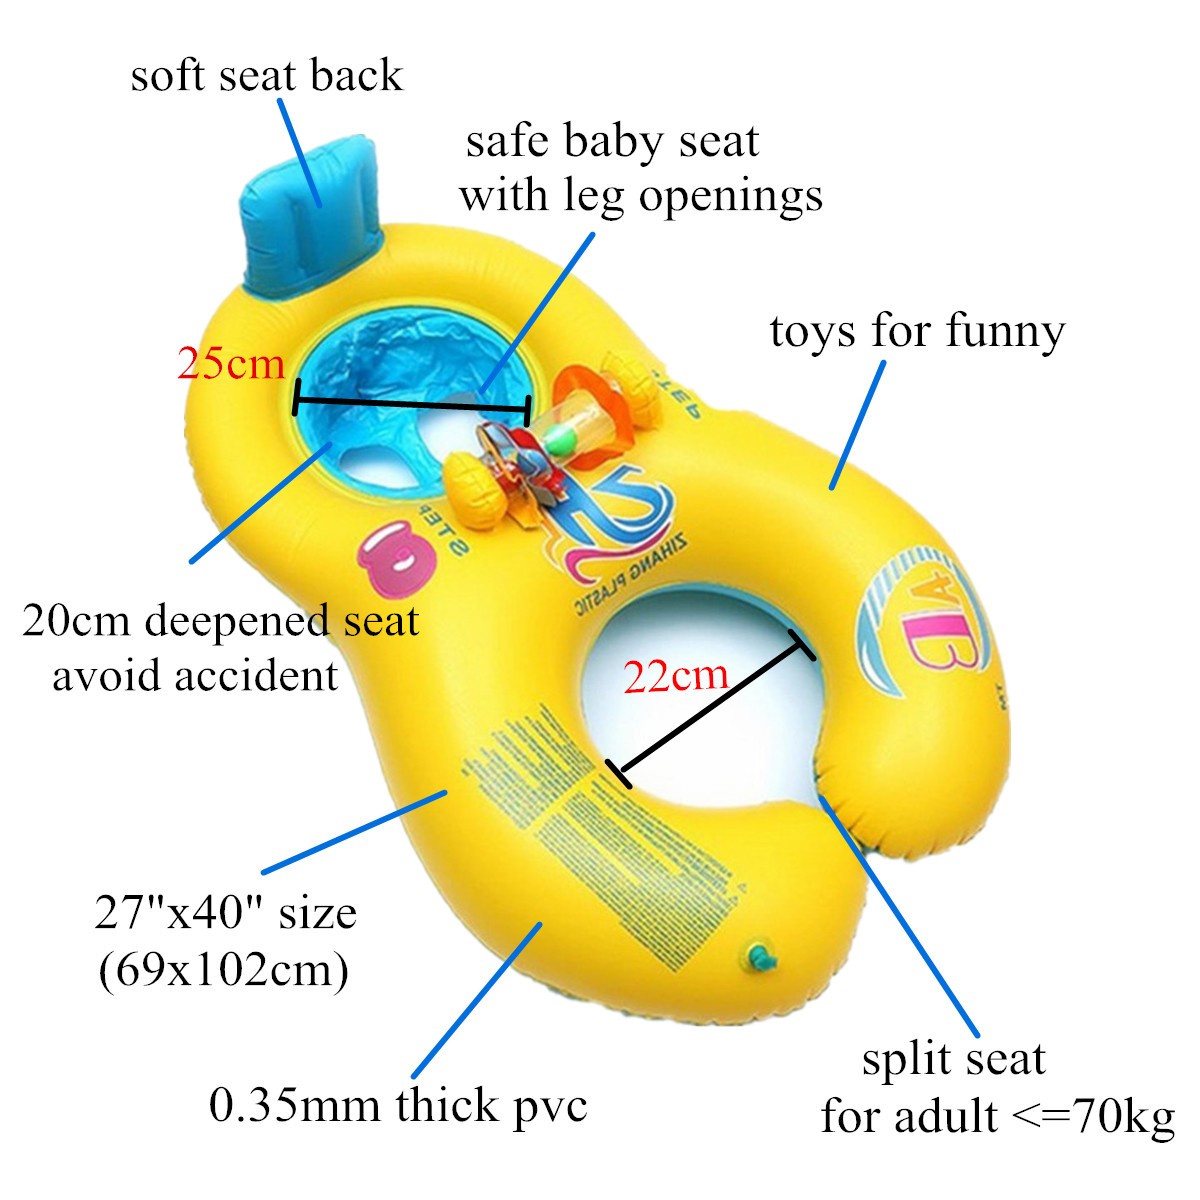 ABC-Safe-Inflatable-Mother-And-Baby-Swim-Float-Boat-Raft-Kids-Chair-Seat-Boat-Play-Pool-Bath-Swimmin-48774-3